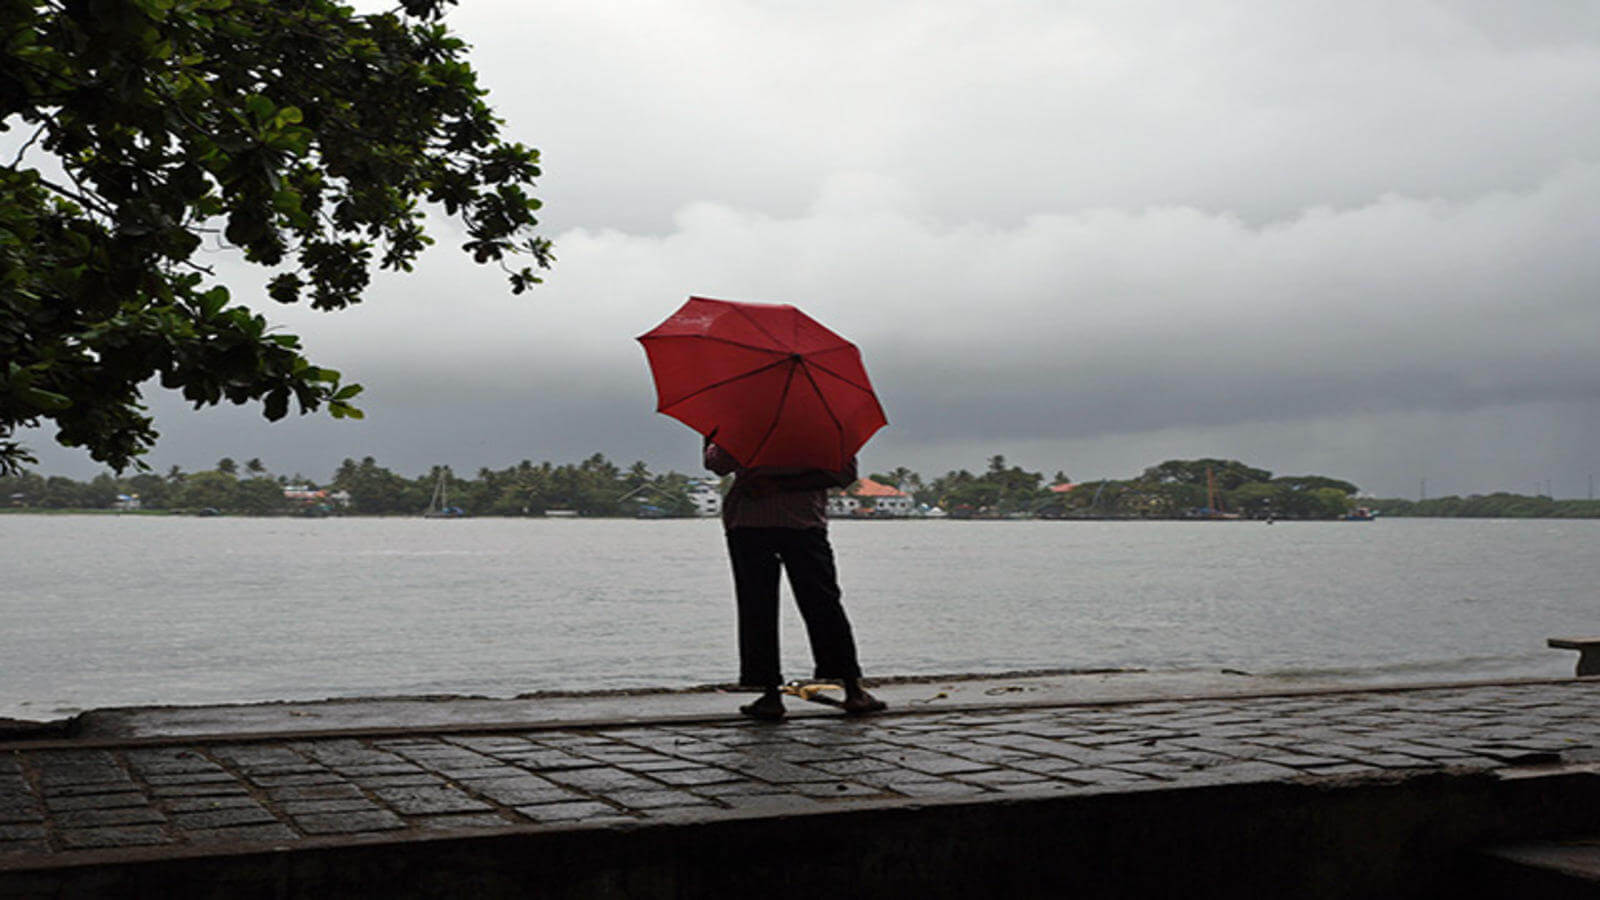 Monsoon expected to hit Kerala in next 24 hours: IMD